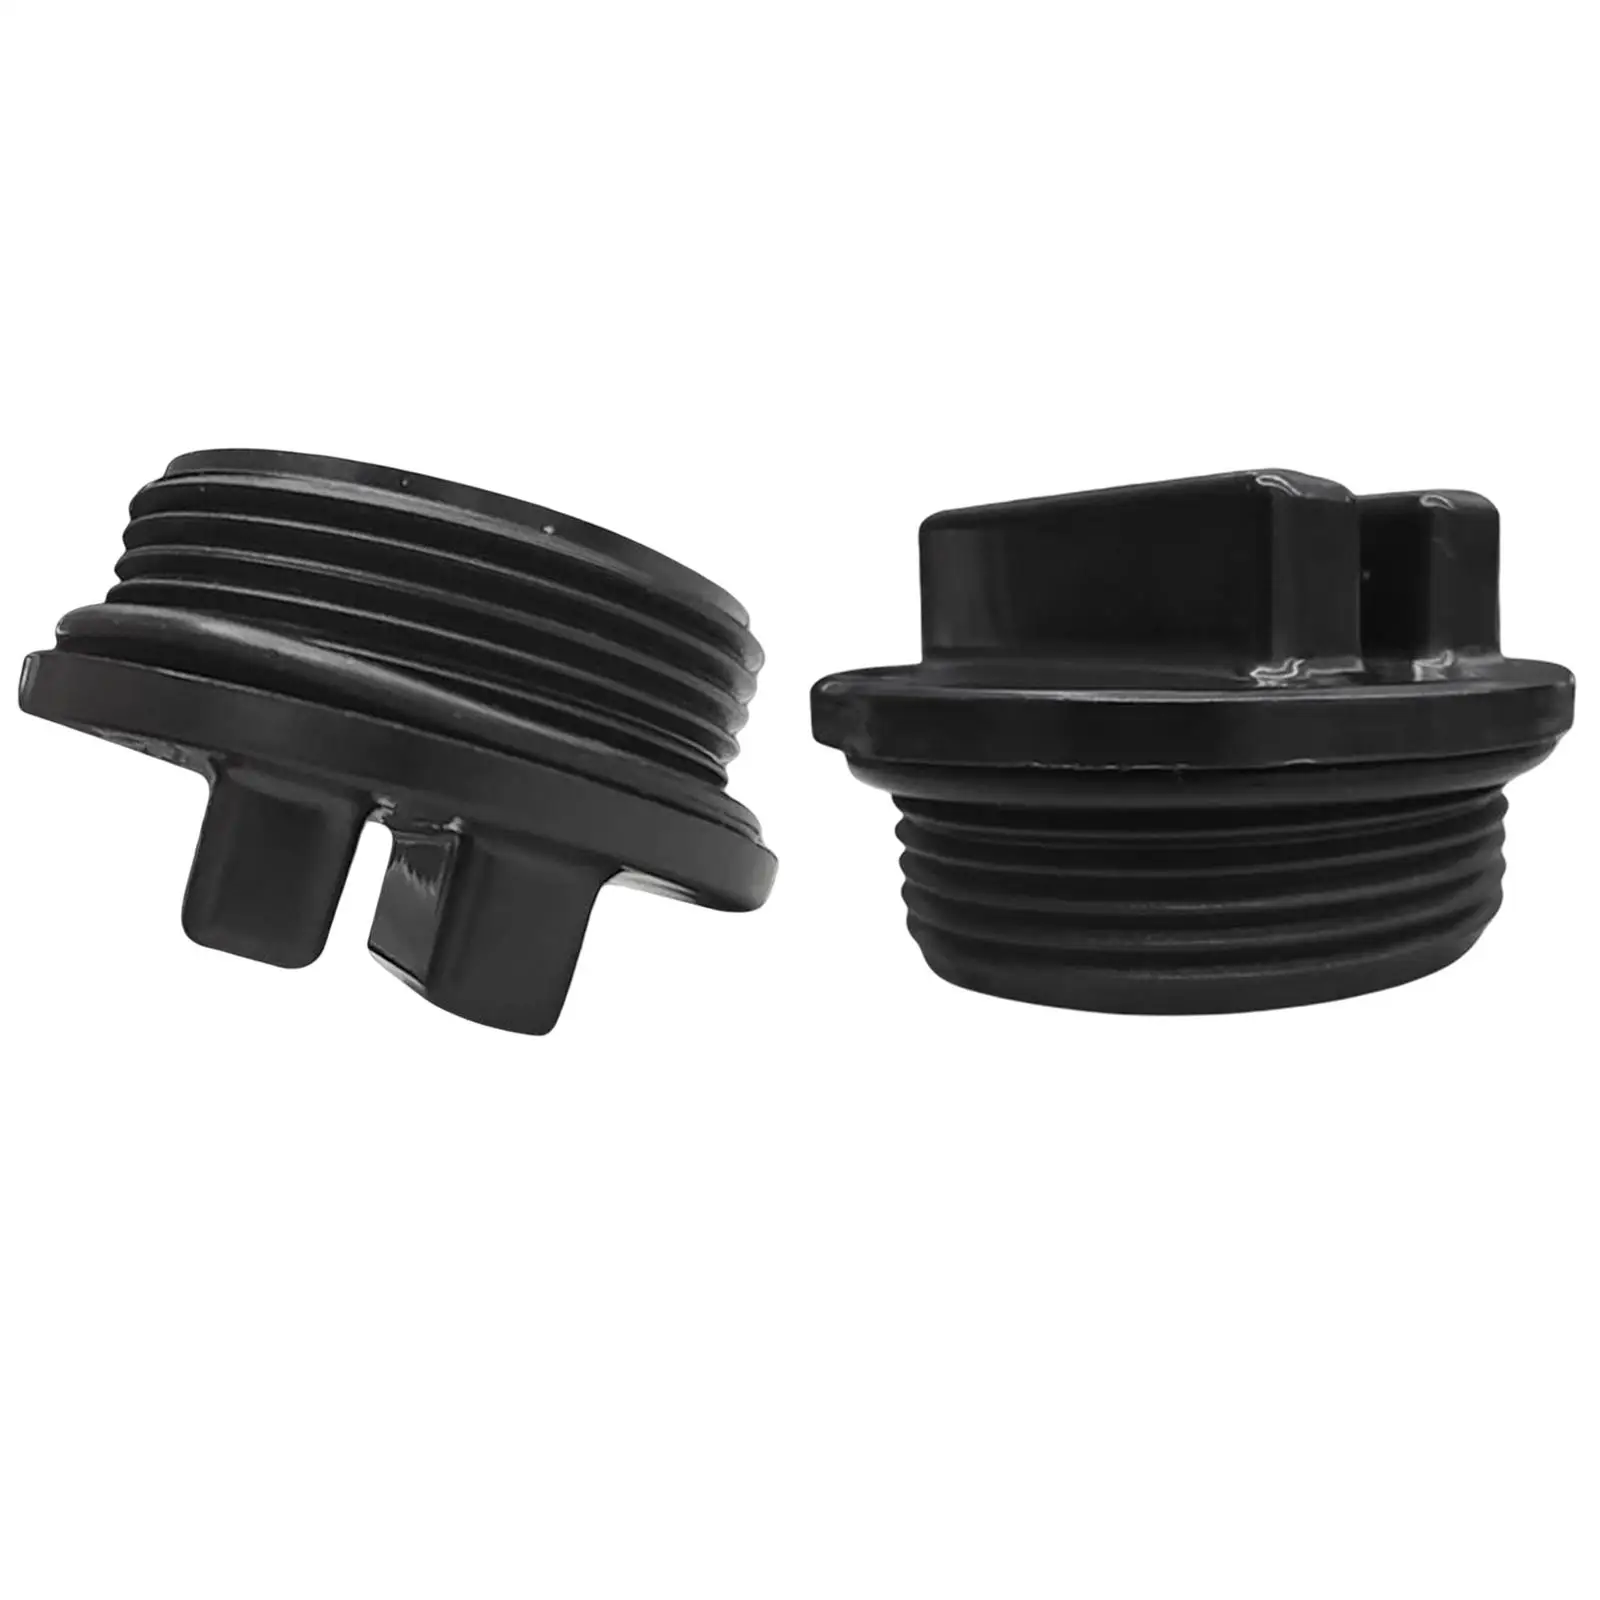 2Pcs Threaded Pool Filter Drains Replacement Parts Drain Cover Outlet Plugs 1.5 Inches Filter Drain Caps for Bathtub Accessories